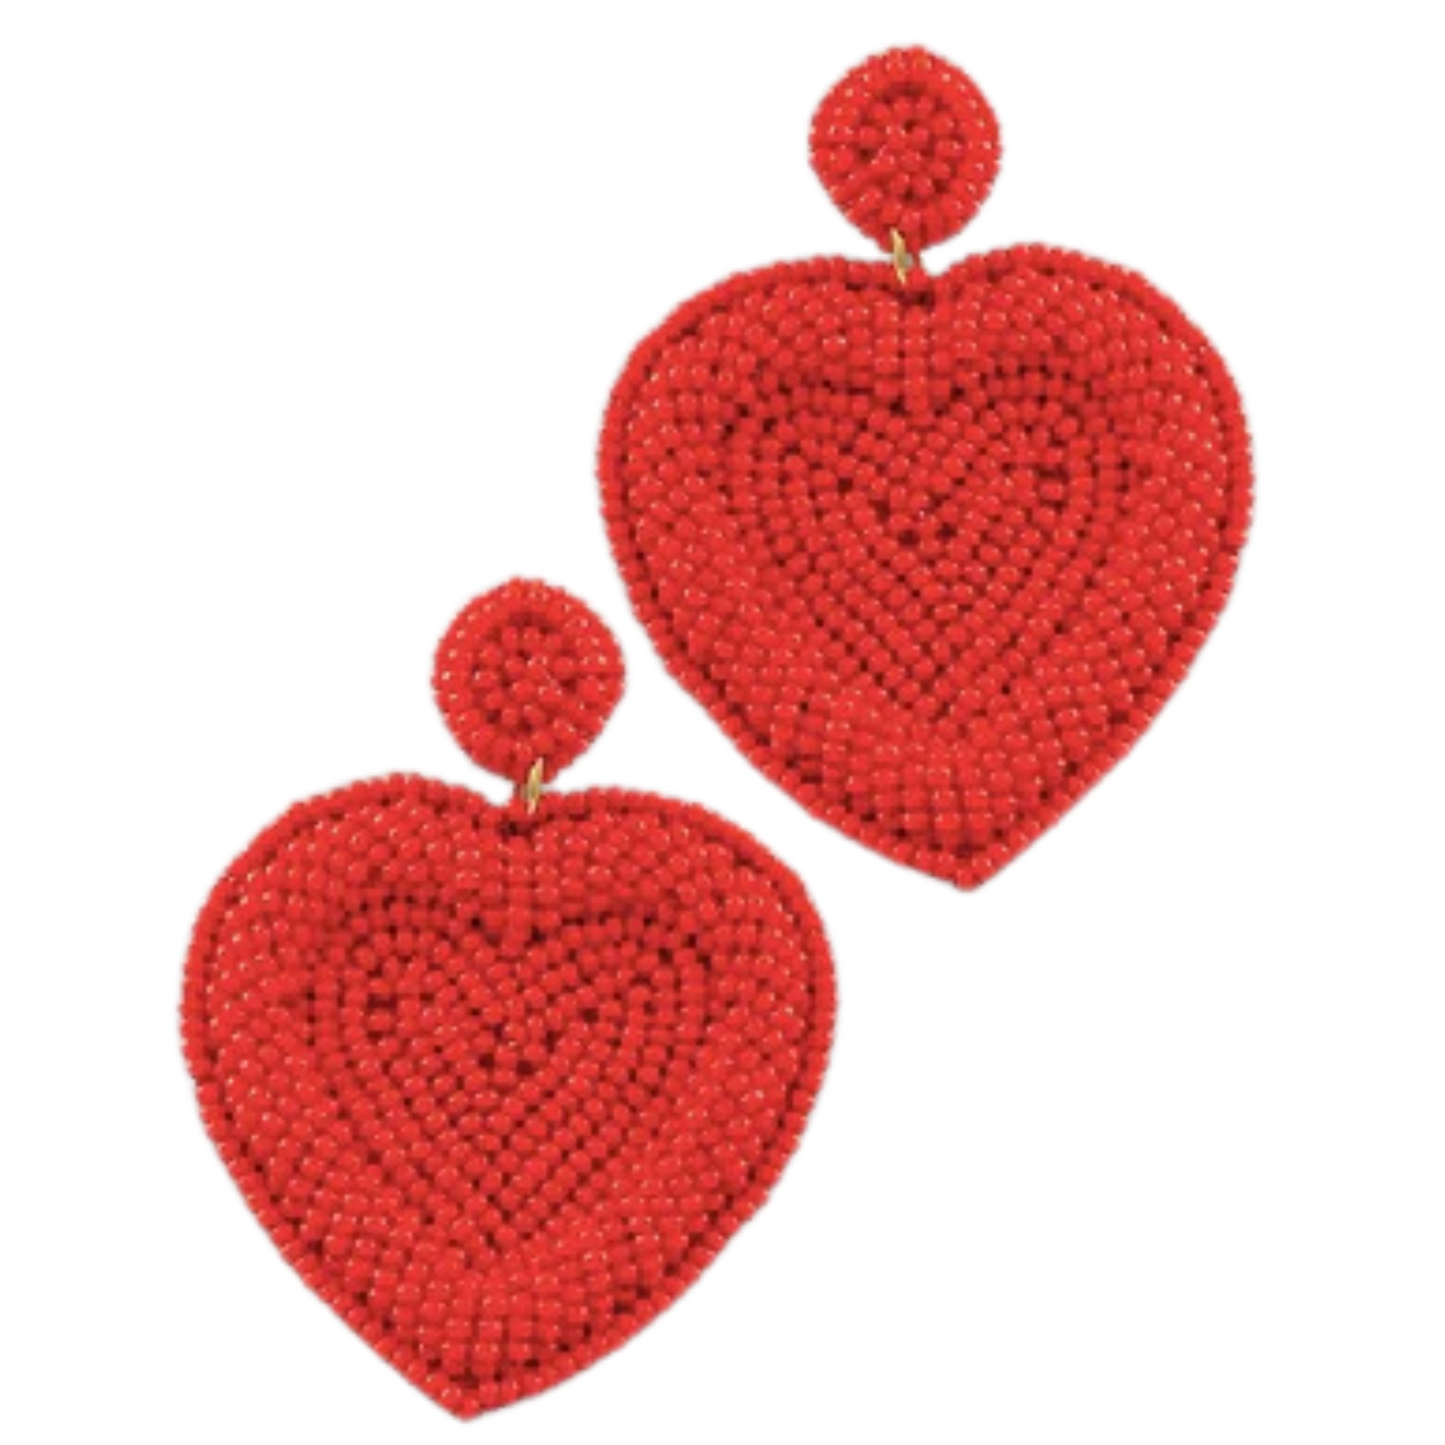 These beautiful Bead Heart Earrings are the perfect Valentine's Day accessory. With their red, heart-shaped design and delicate beaded detailing, they are sure to make a statement. Dangling elegantly from your ears, these earrings will add a touch of romance to any outfit.